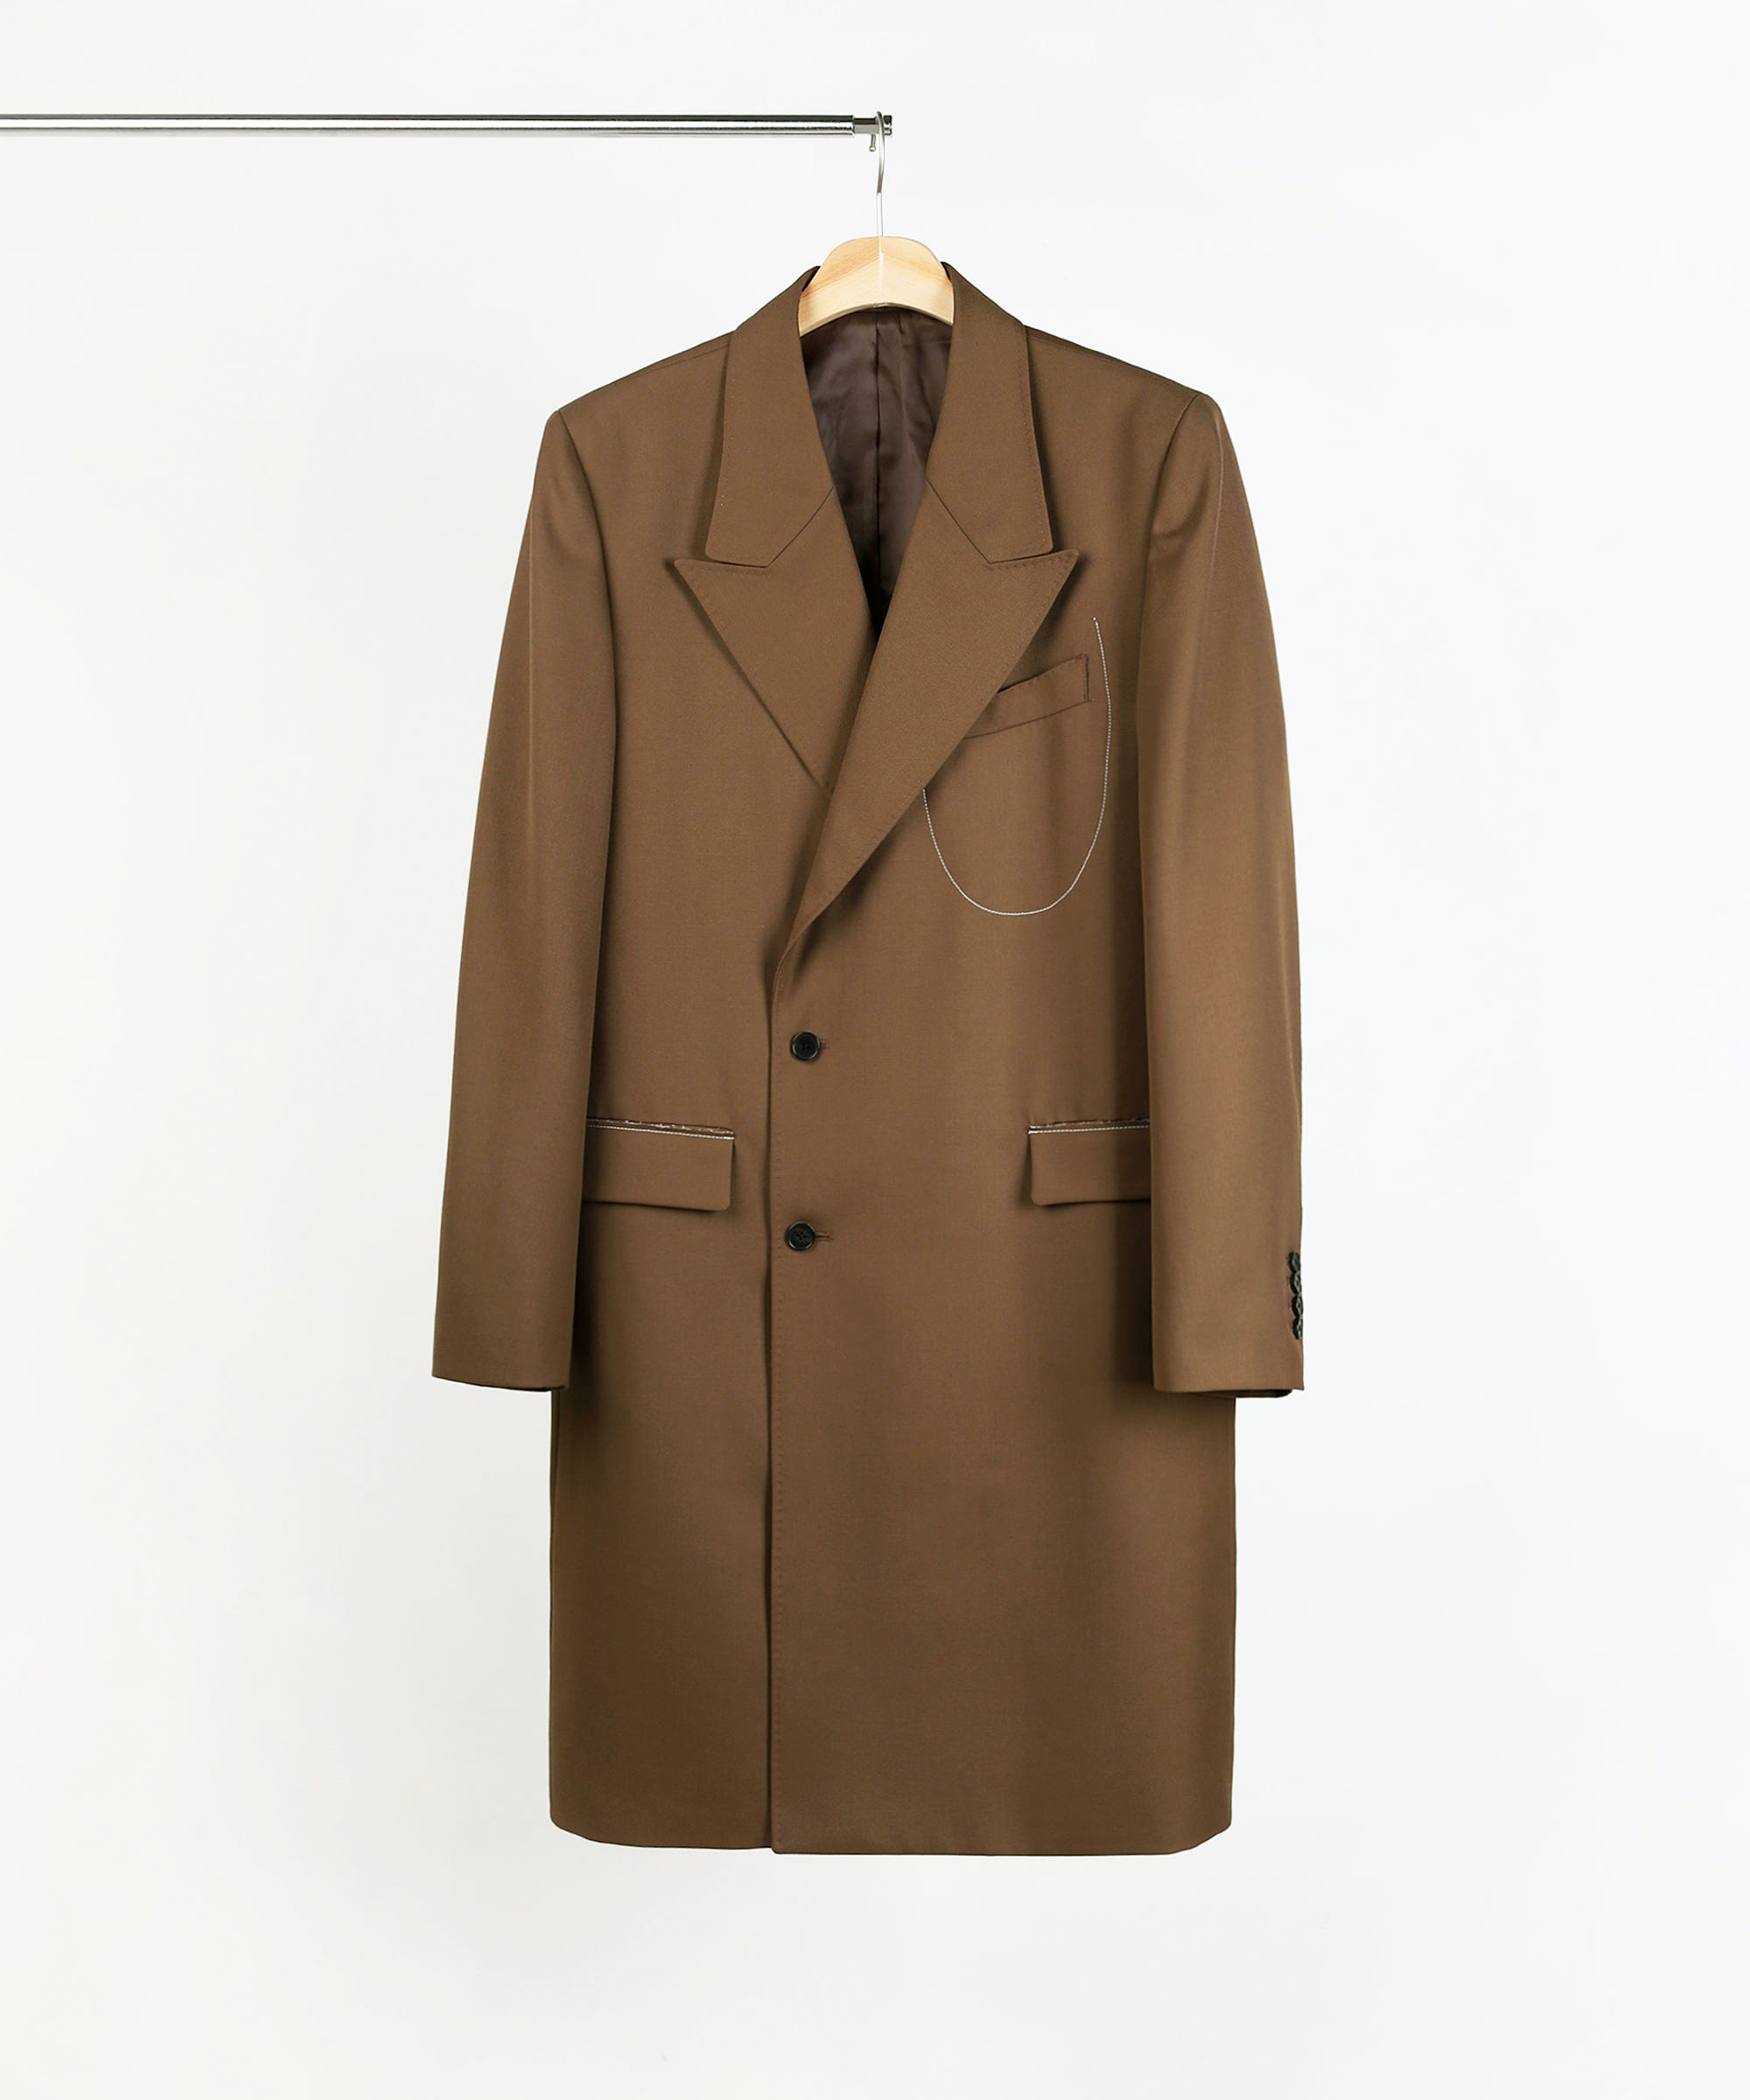 WINE BOTTLE DOUBLE BREASTED TAILORED COAT BROWN